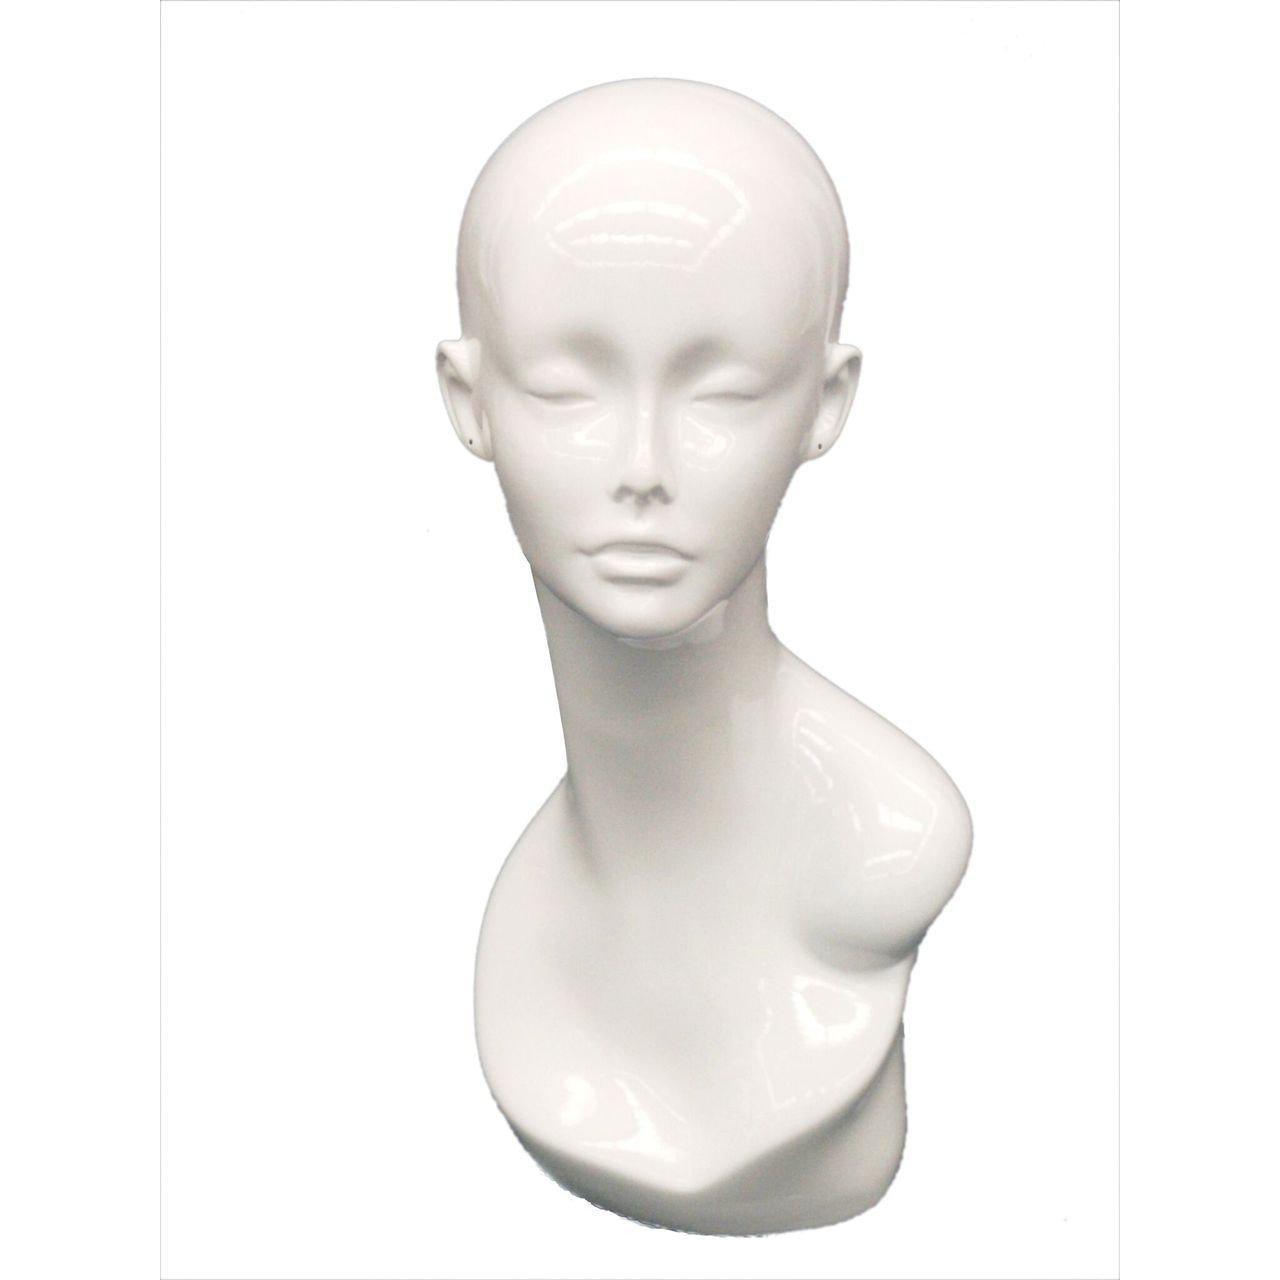 Female Mannequin Head MM-MDTINAW - Mannequin Mall